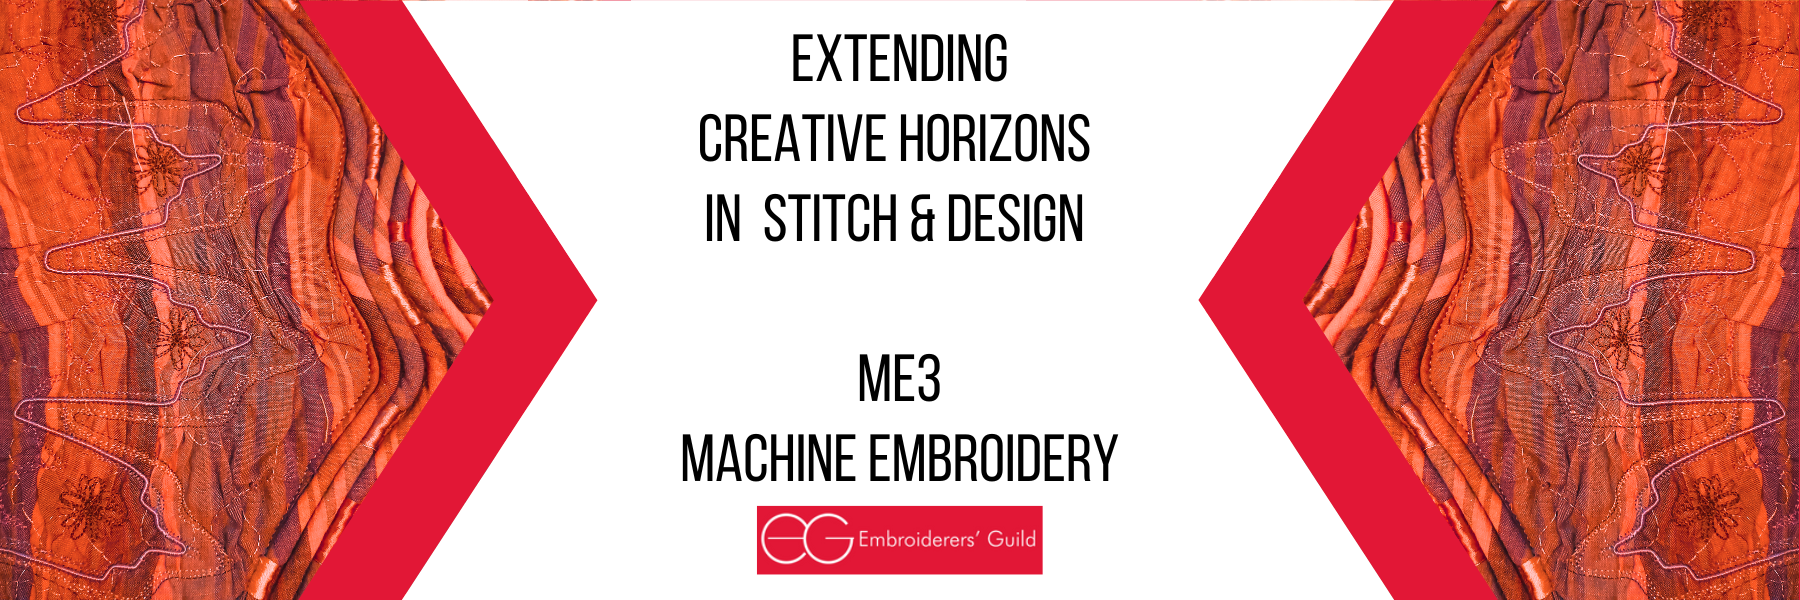 extending creative horizons in stitch  design in machine embroidery online course from The Embroiderers Guild